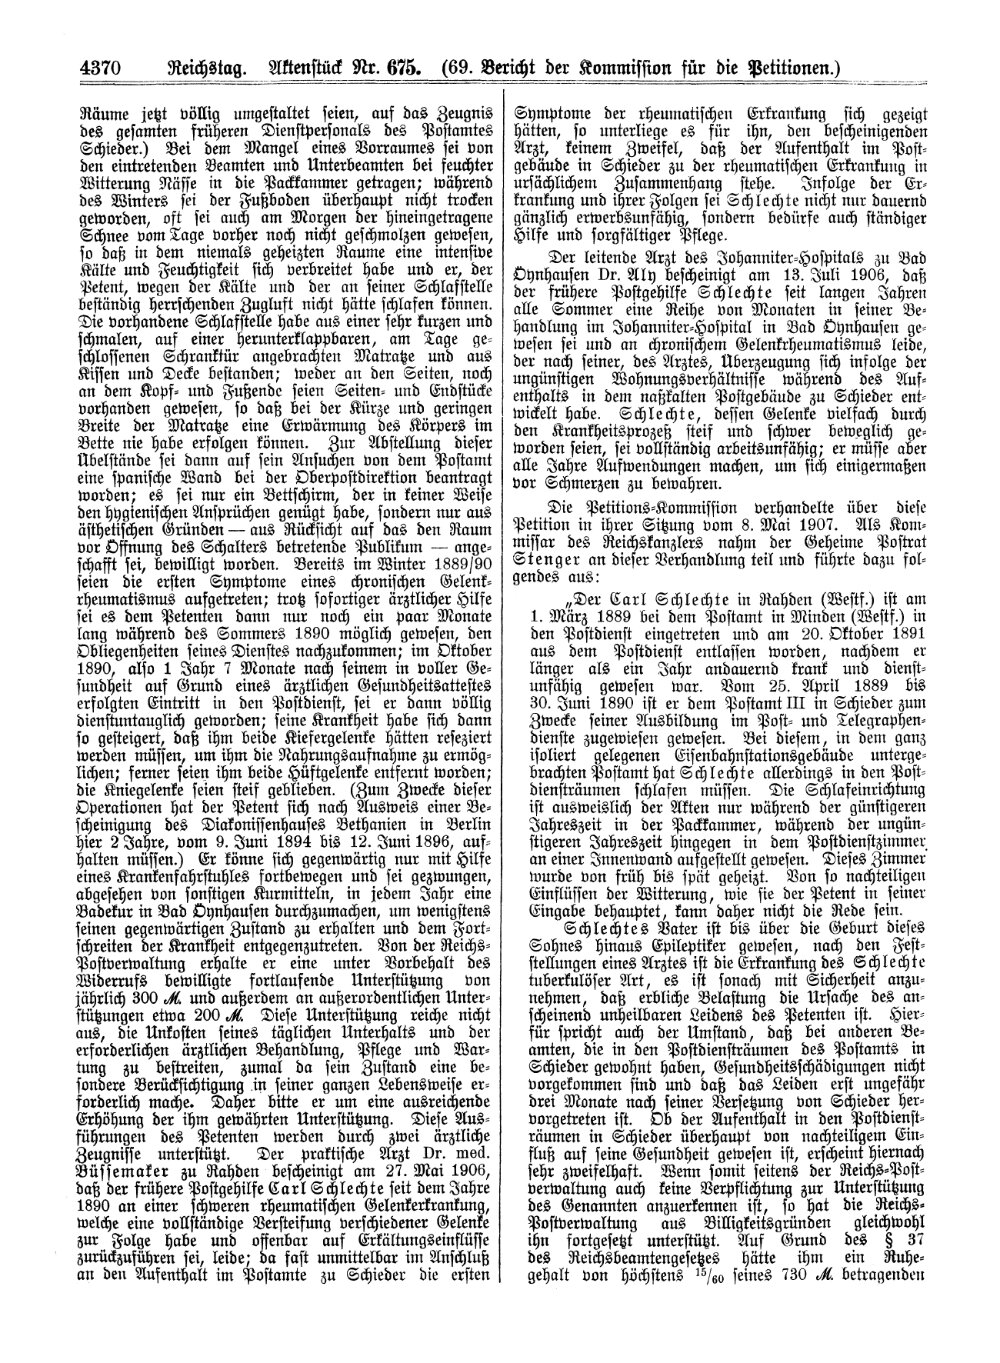 Scan of page 4370